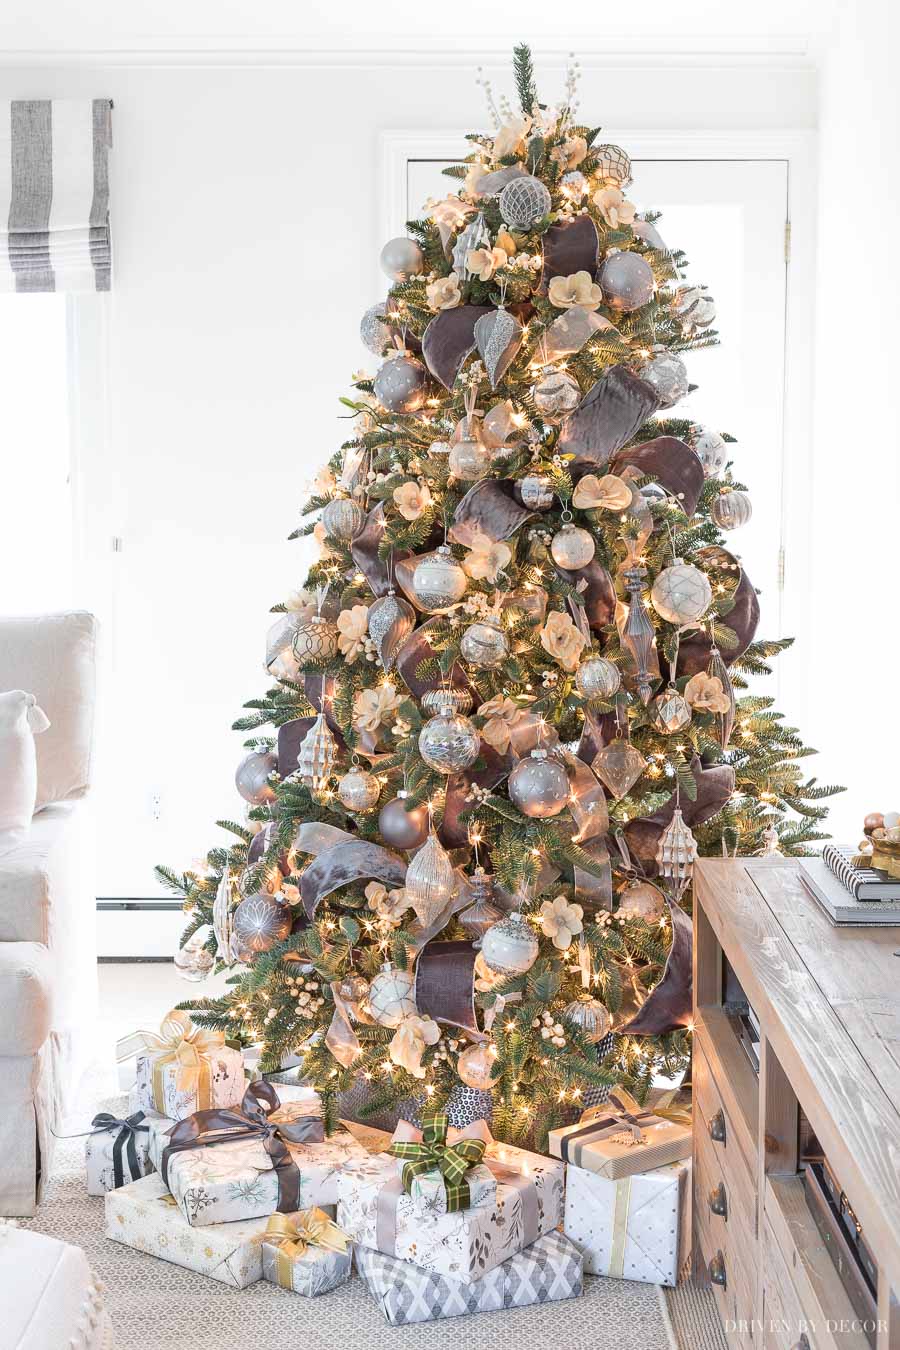 How to Decorate A Christmas Tree Step by Step! - Driven by Decor